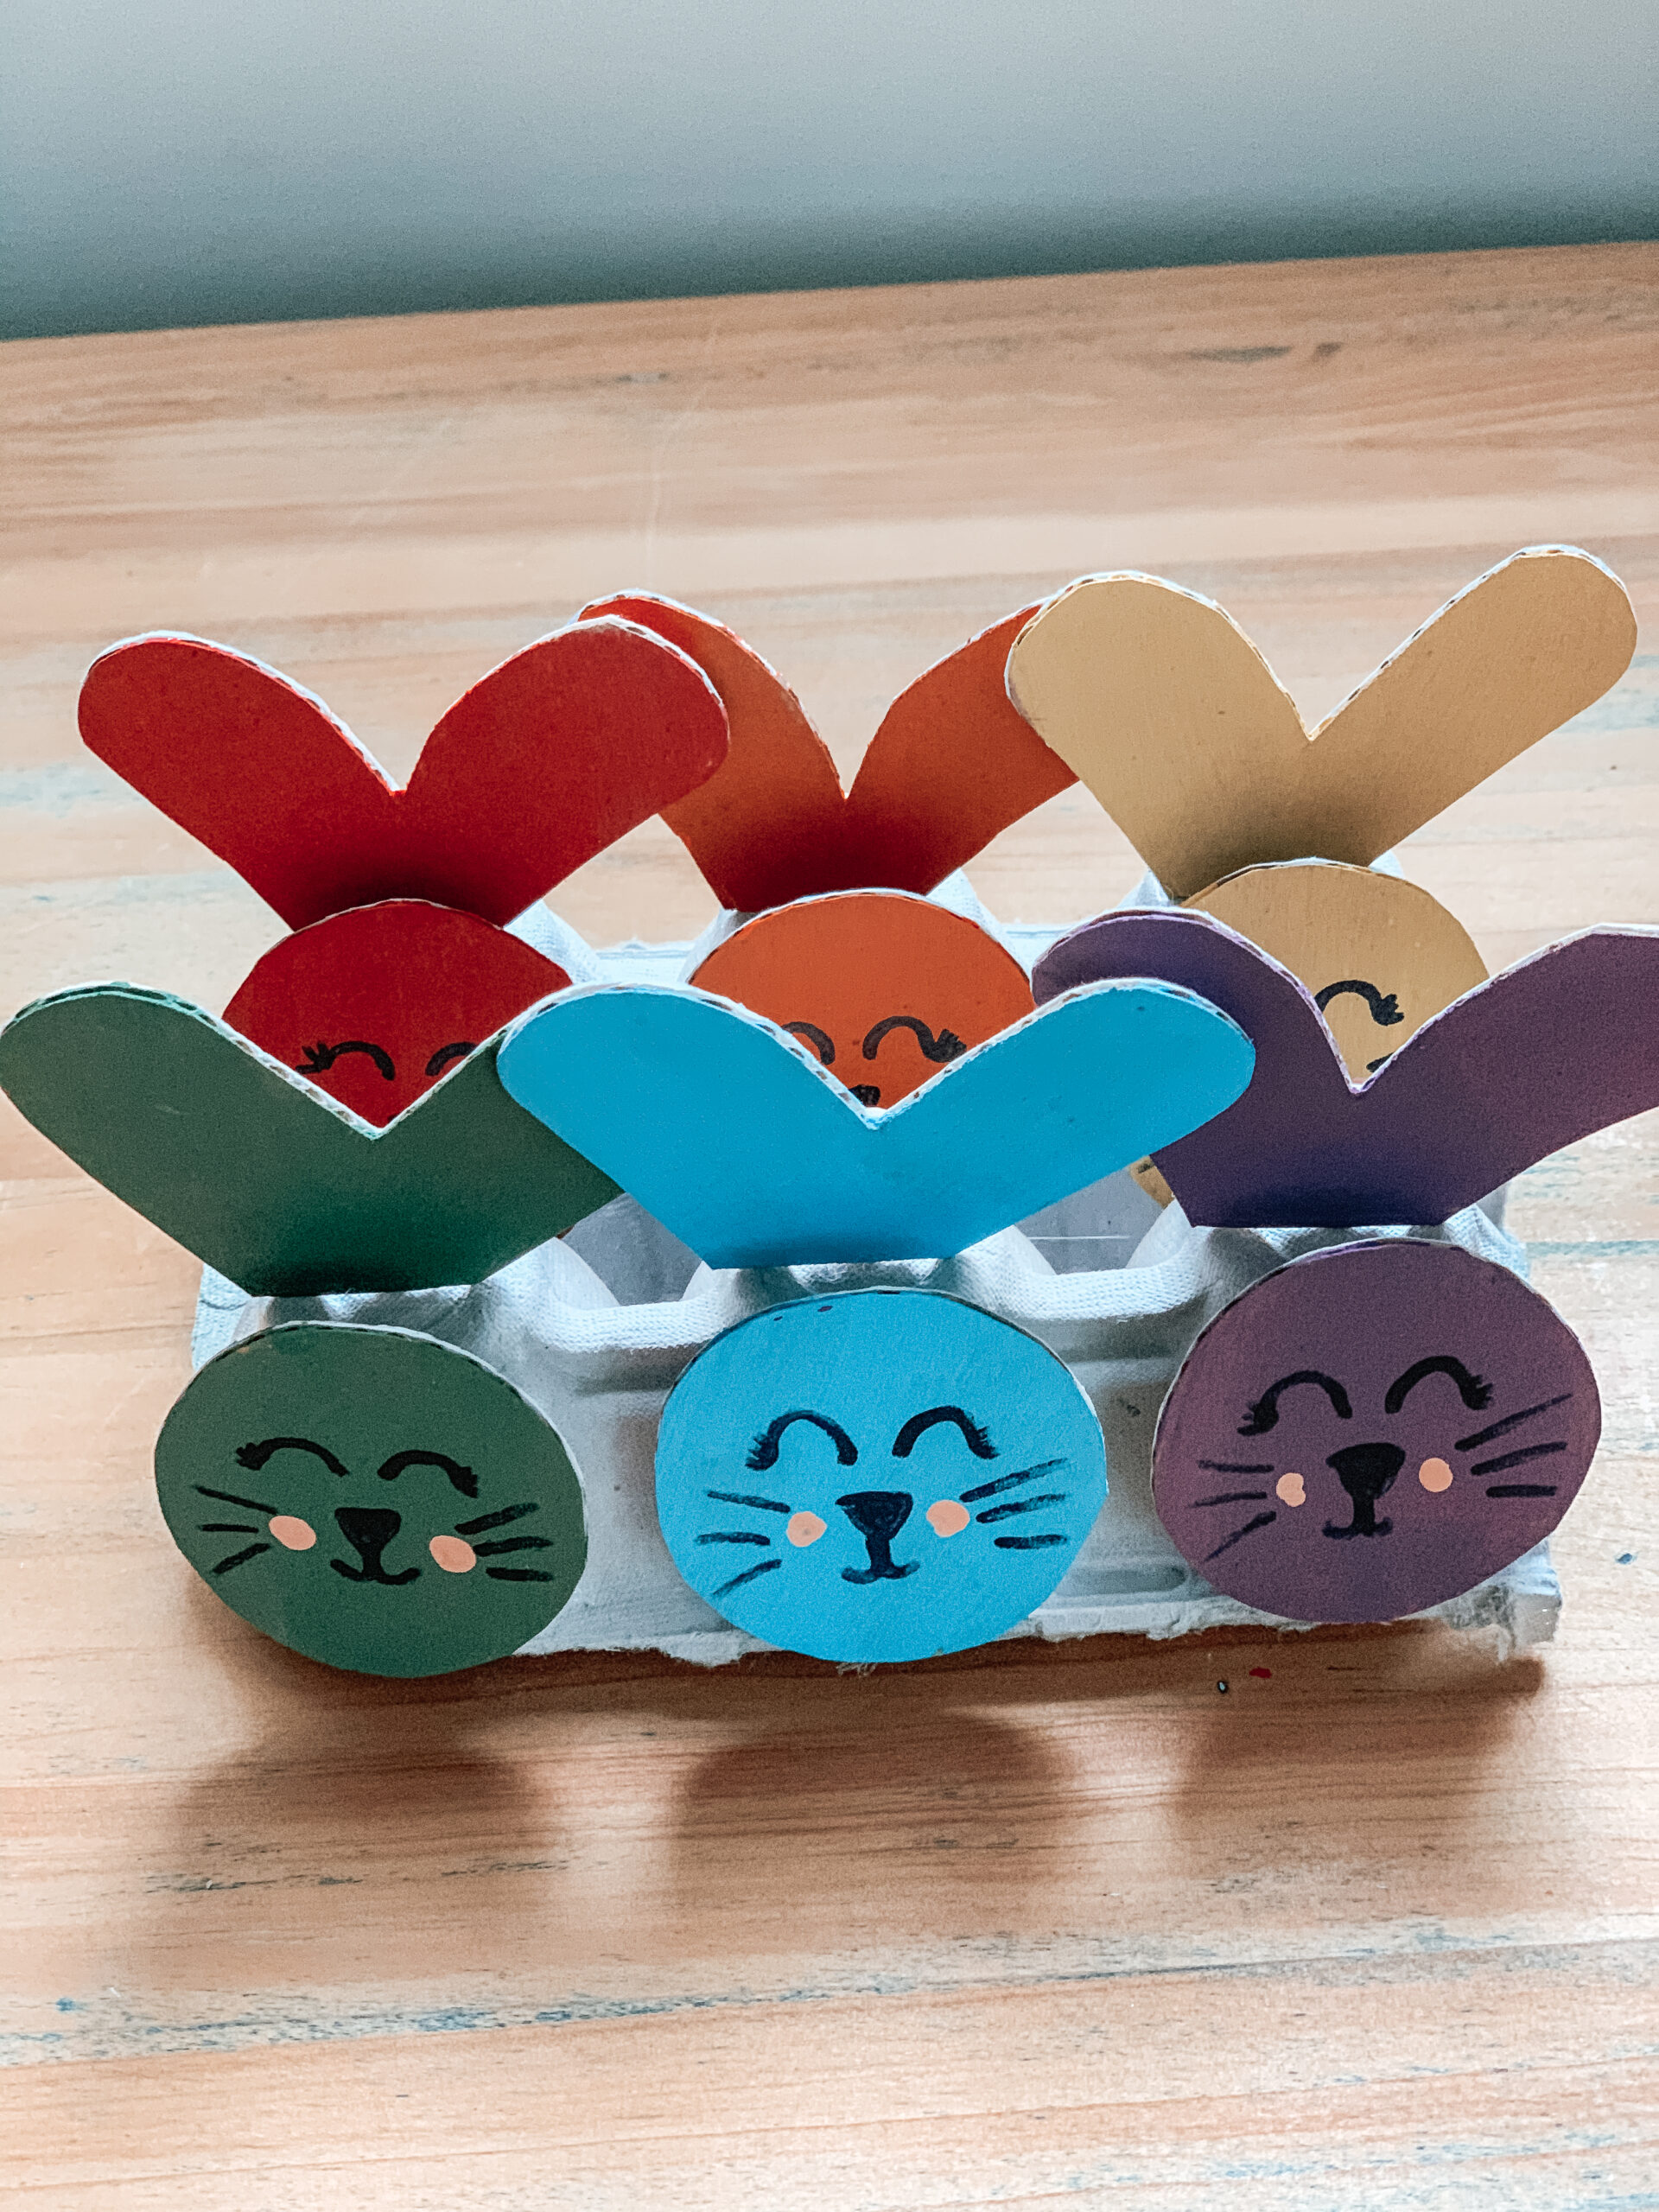 Completed egg carton, bunny craft